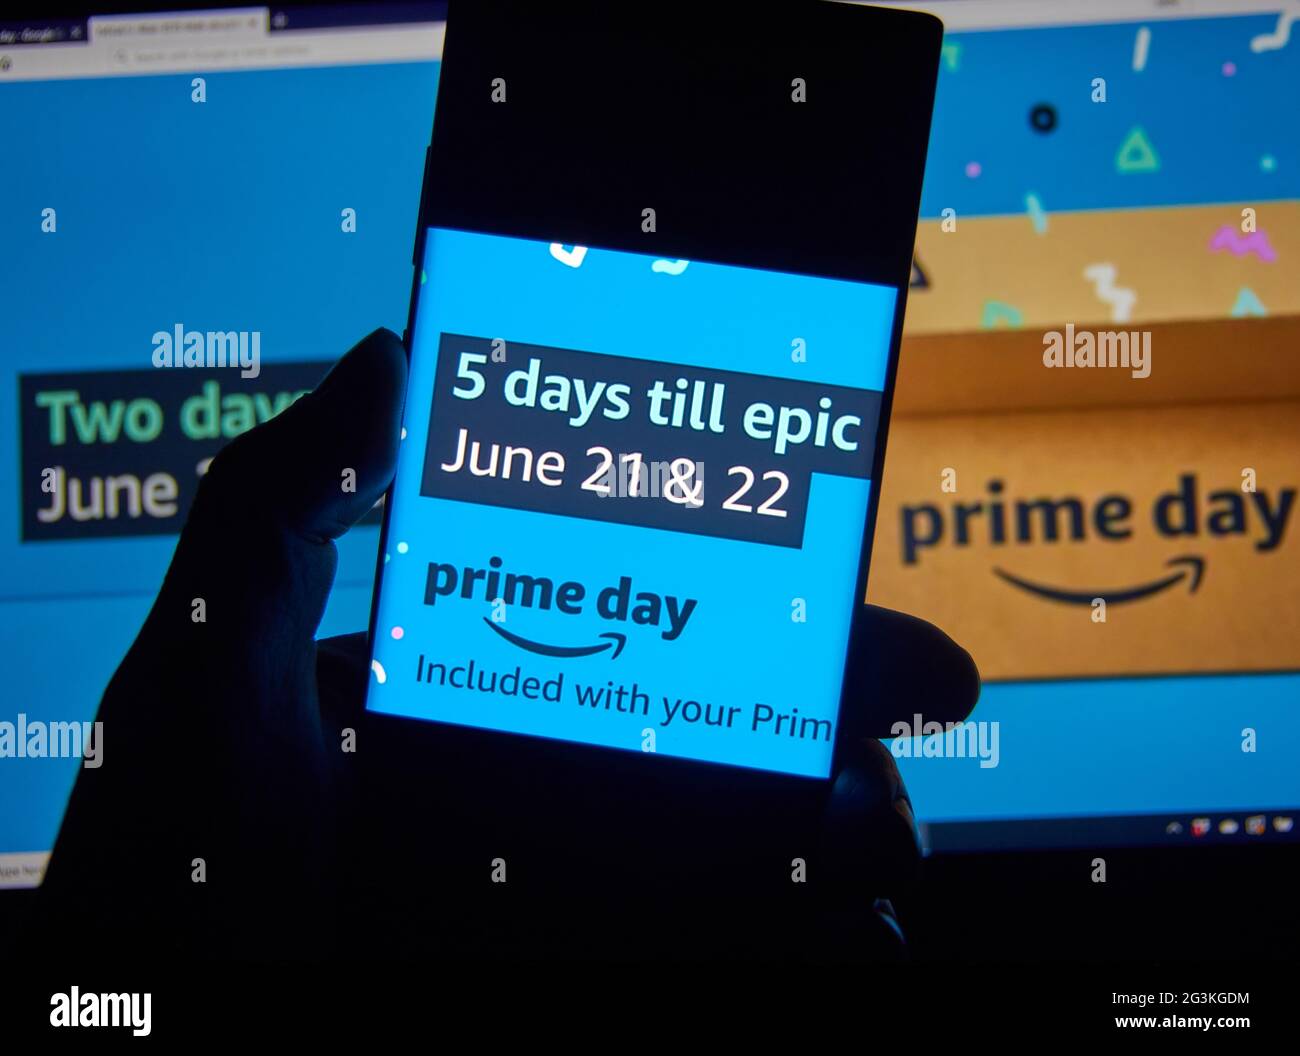 Montreal, Canada - June 17, 2021: Amazon prime day page on a phone screen over Amazon web site. Amazon Prime Day is the retailer's big members-only su Stock Photo